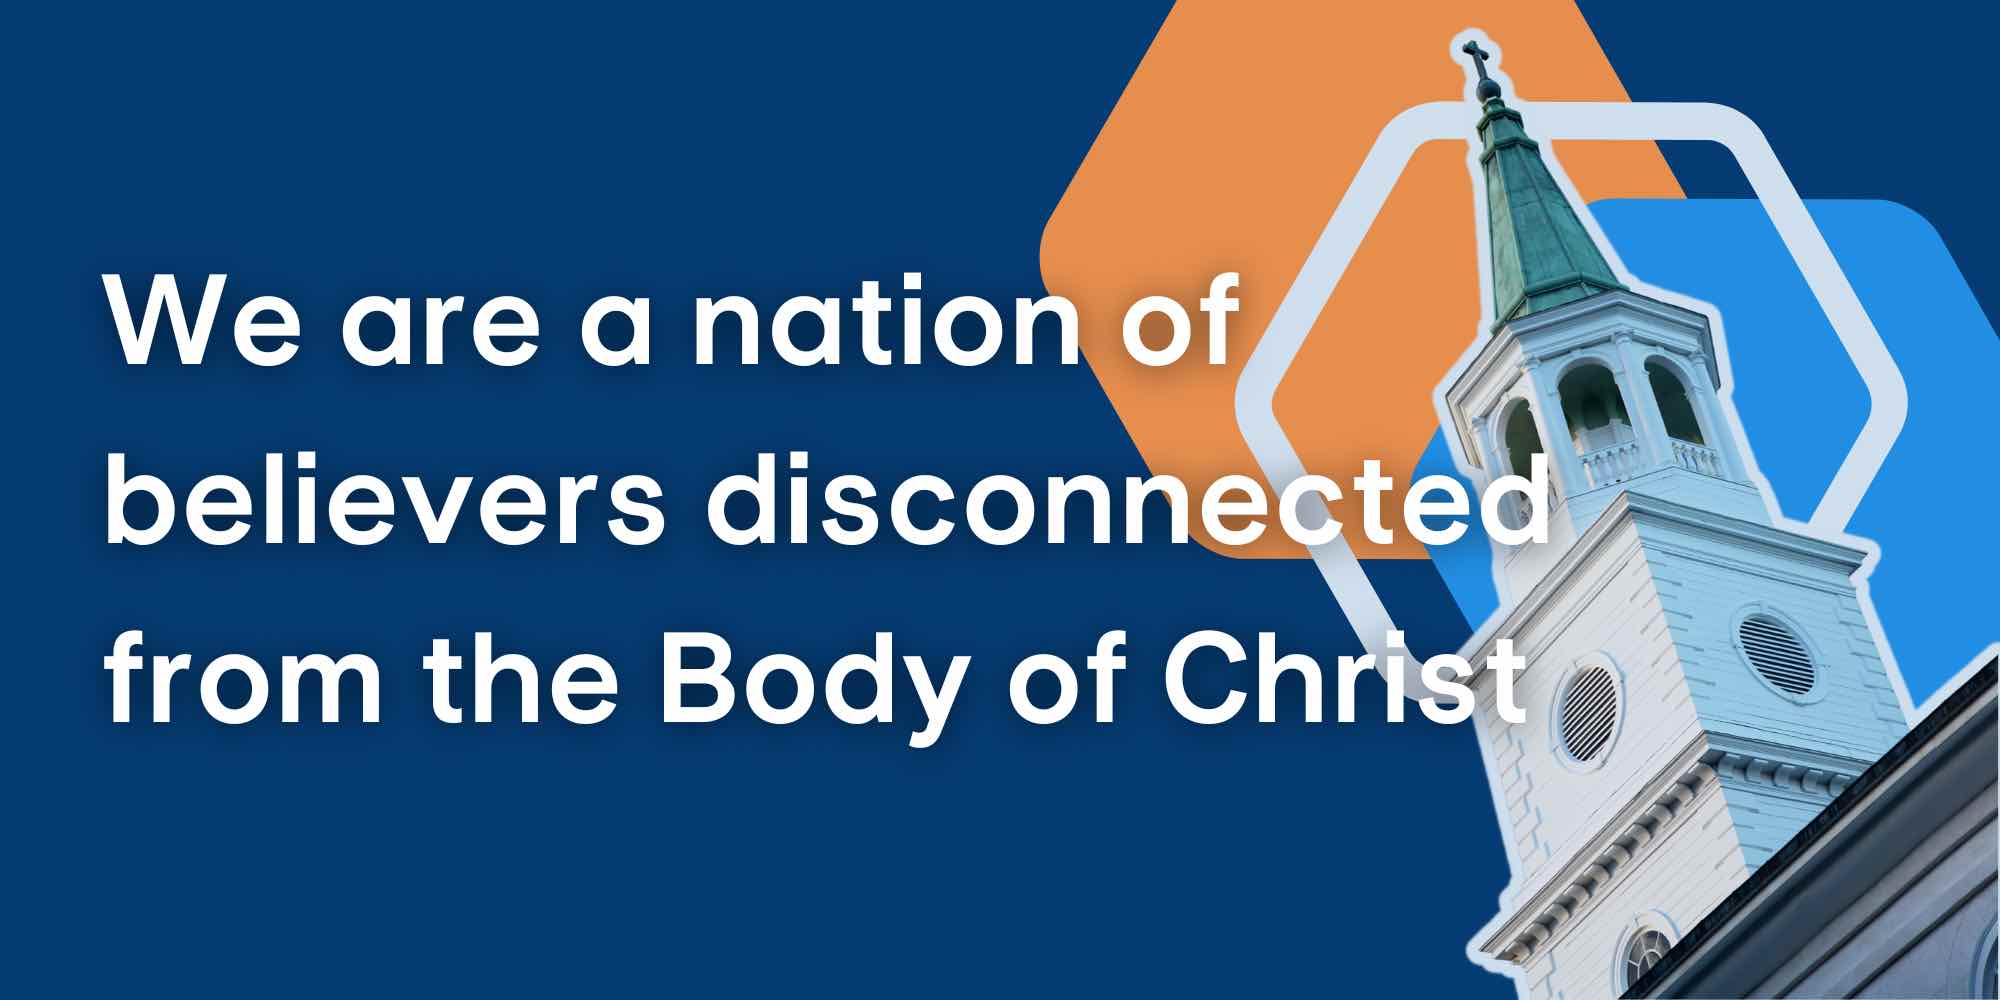 We are a nation of believers disconnected from the Body of Christ